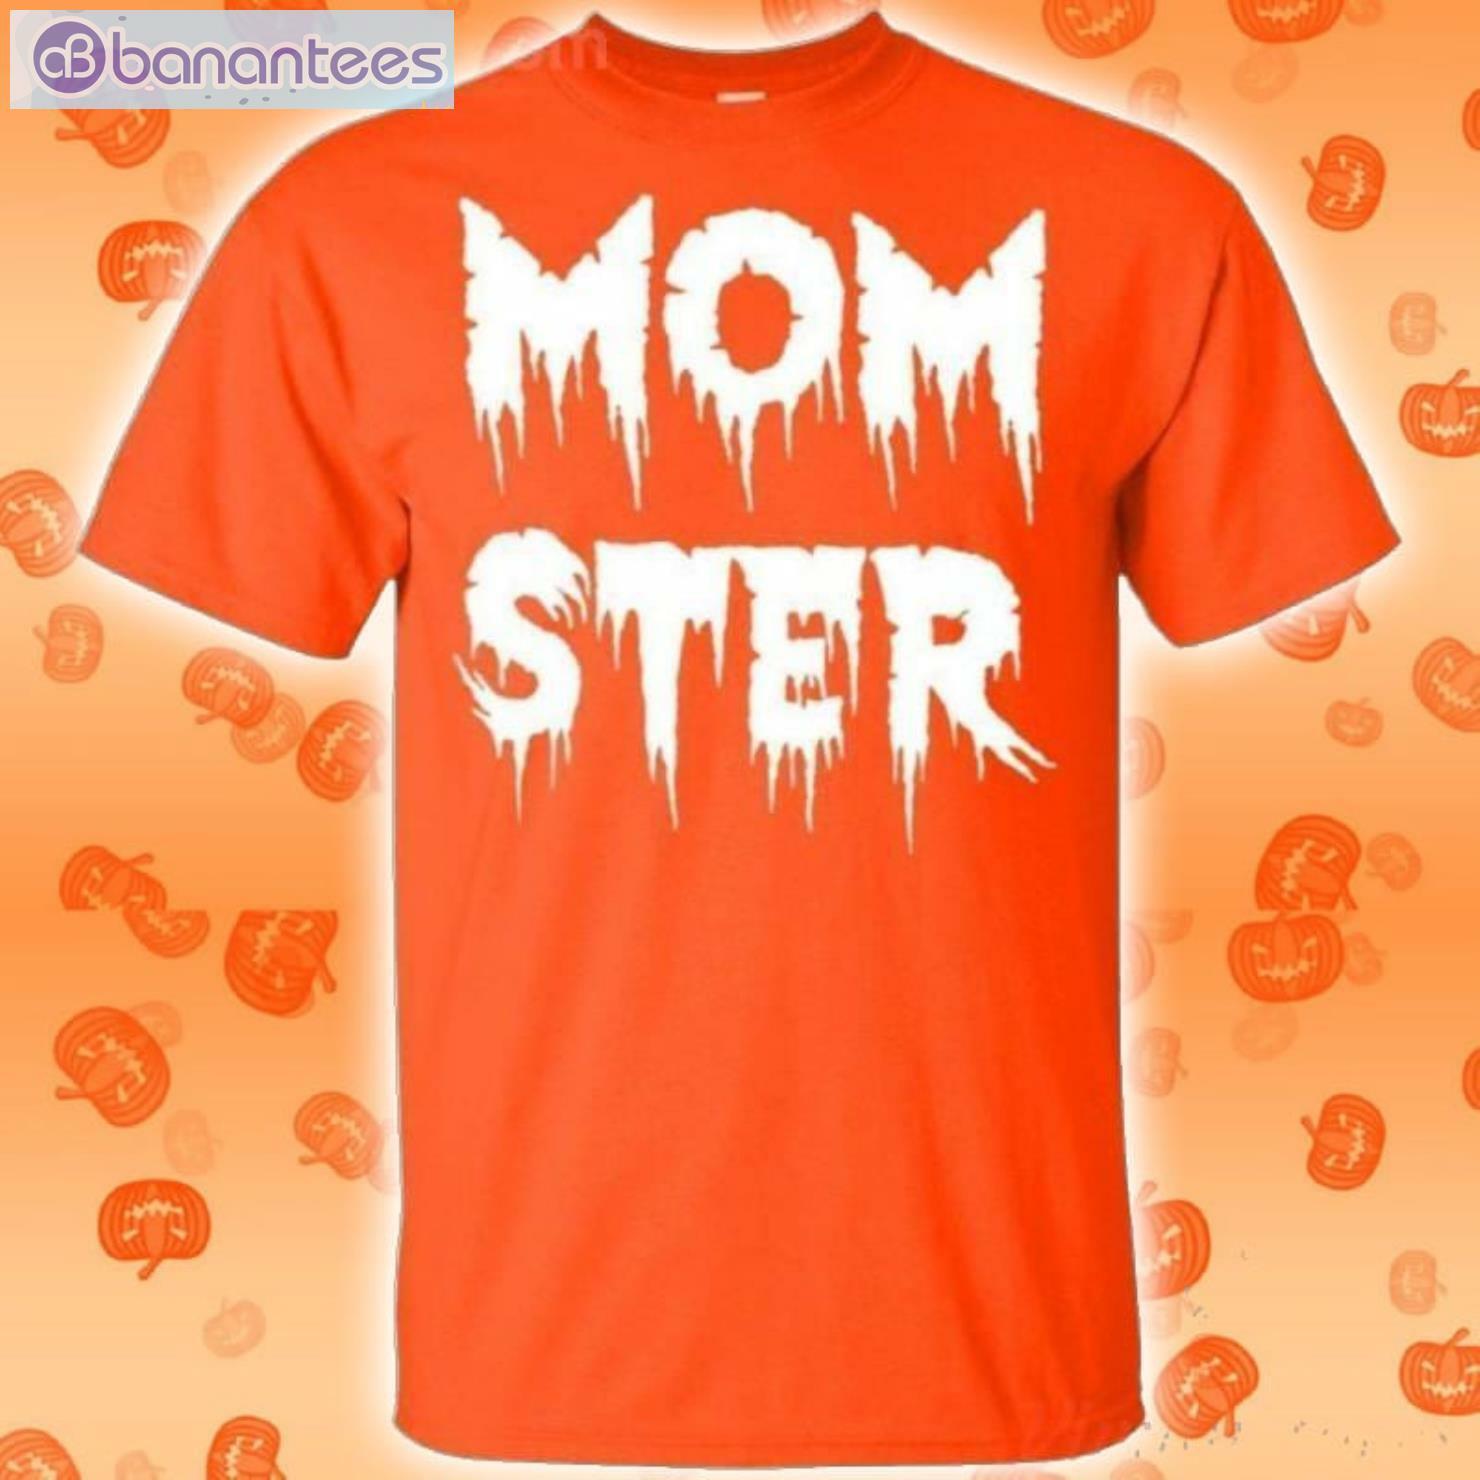 Momster Halloween Funny T-Shirt For Mom Product Photo 2 Product photo 2